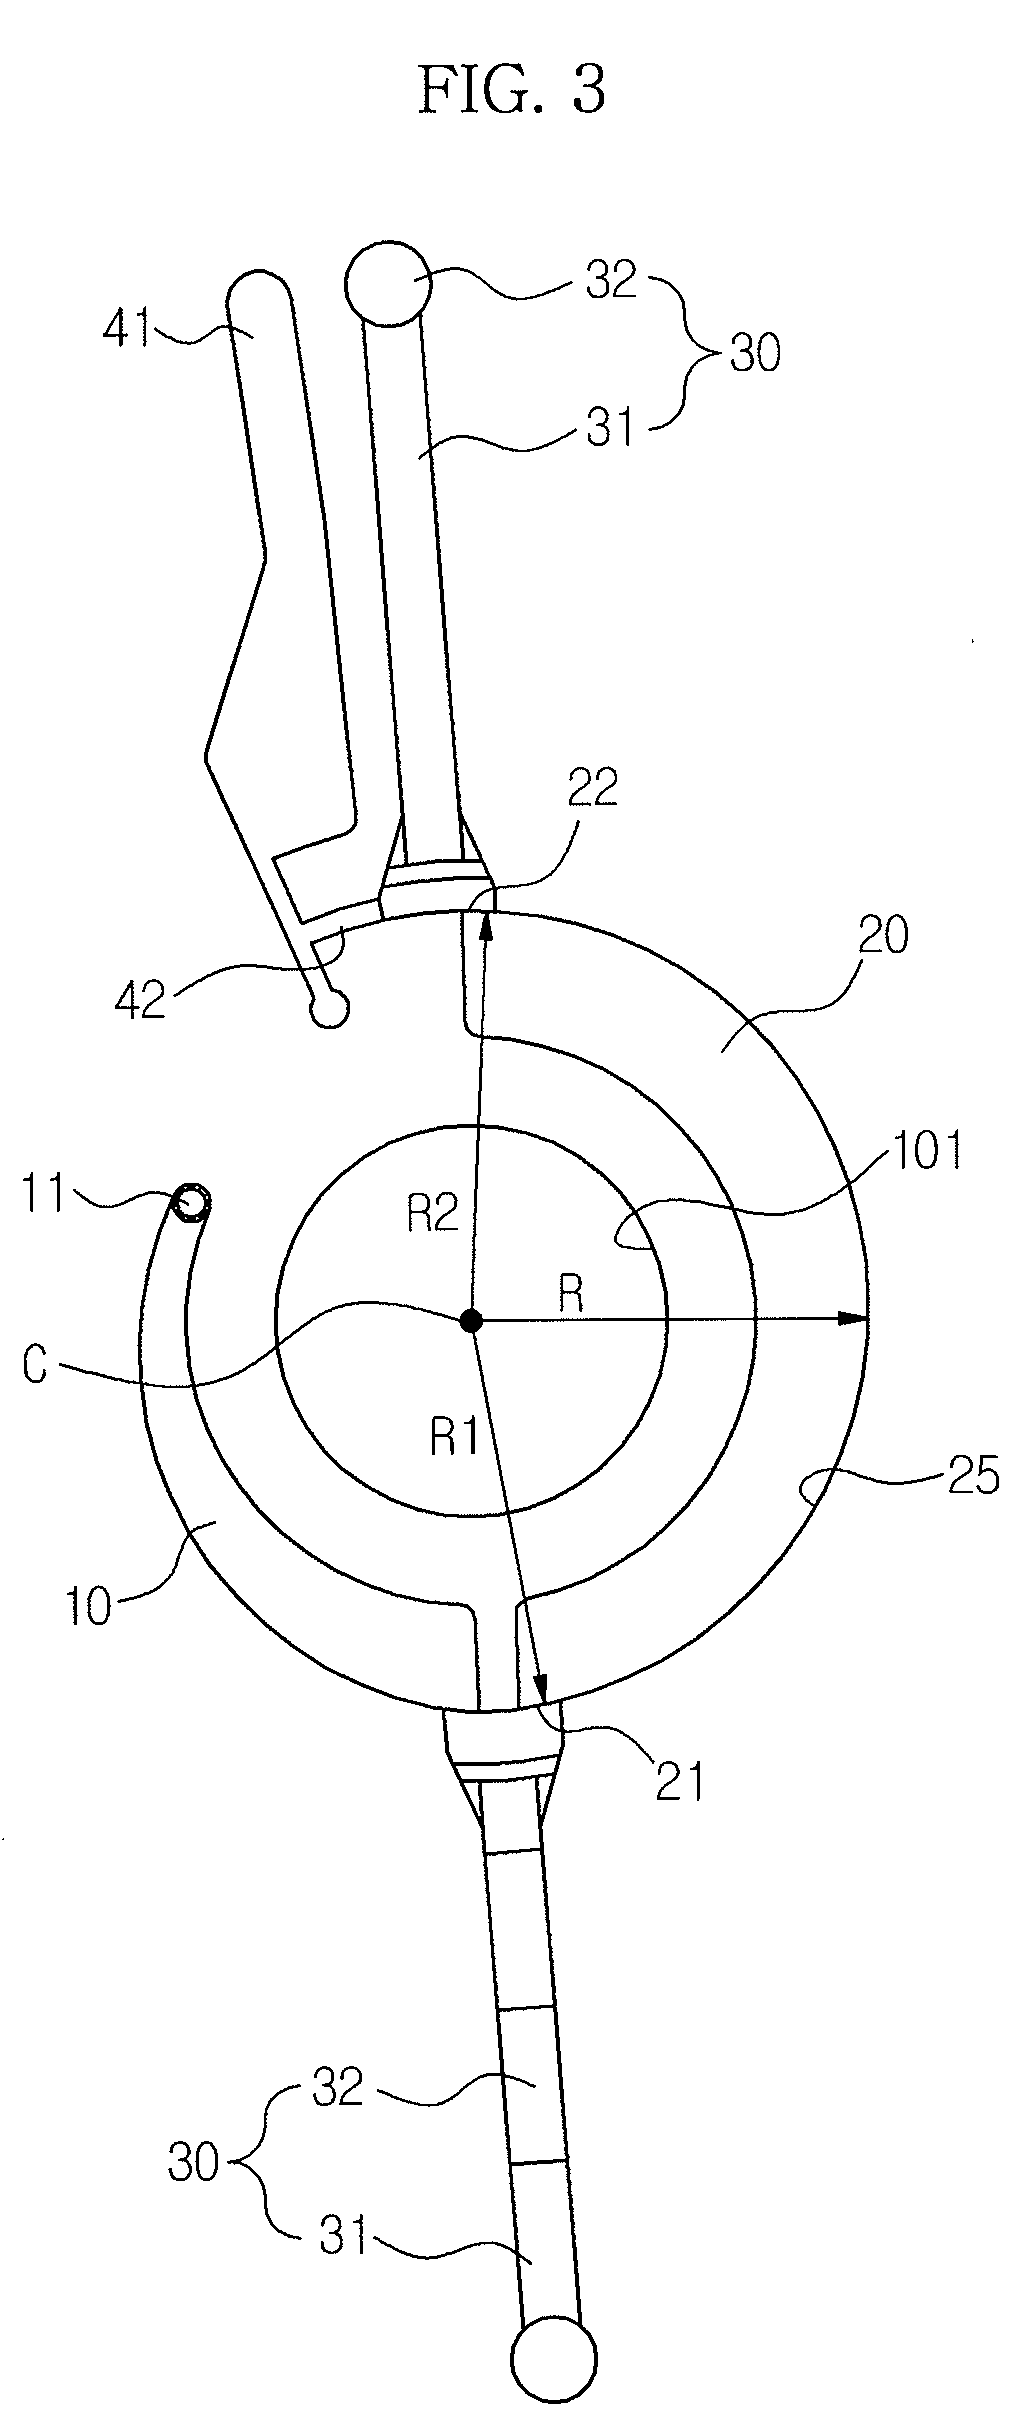 Centrifugal micro-fluidic device and method for detecting target in fluid sample